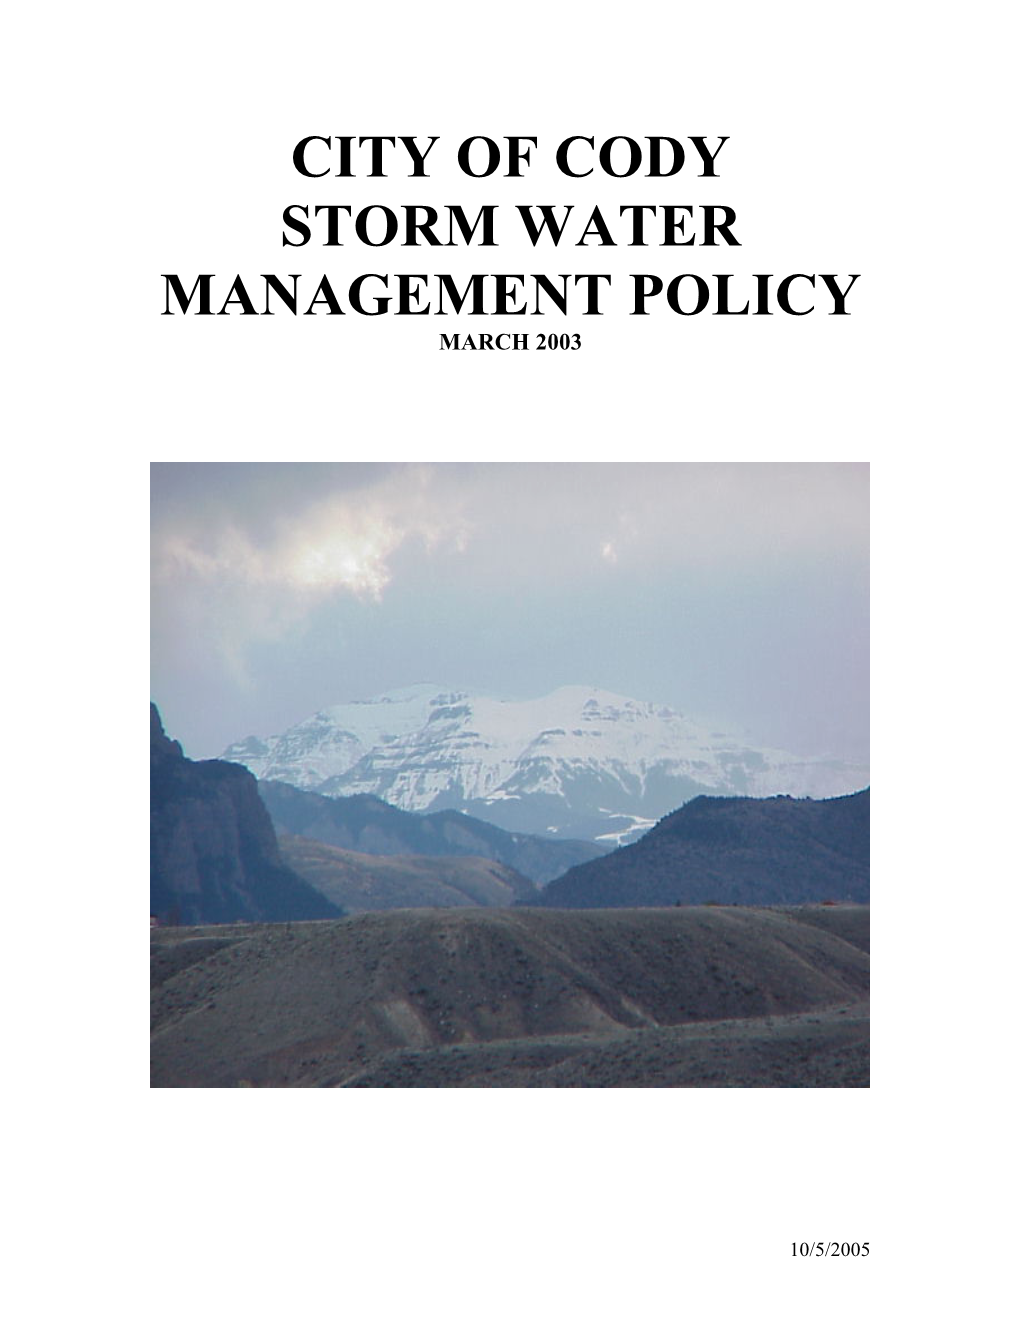 Storm Water Policy Manual